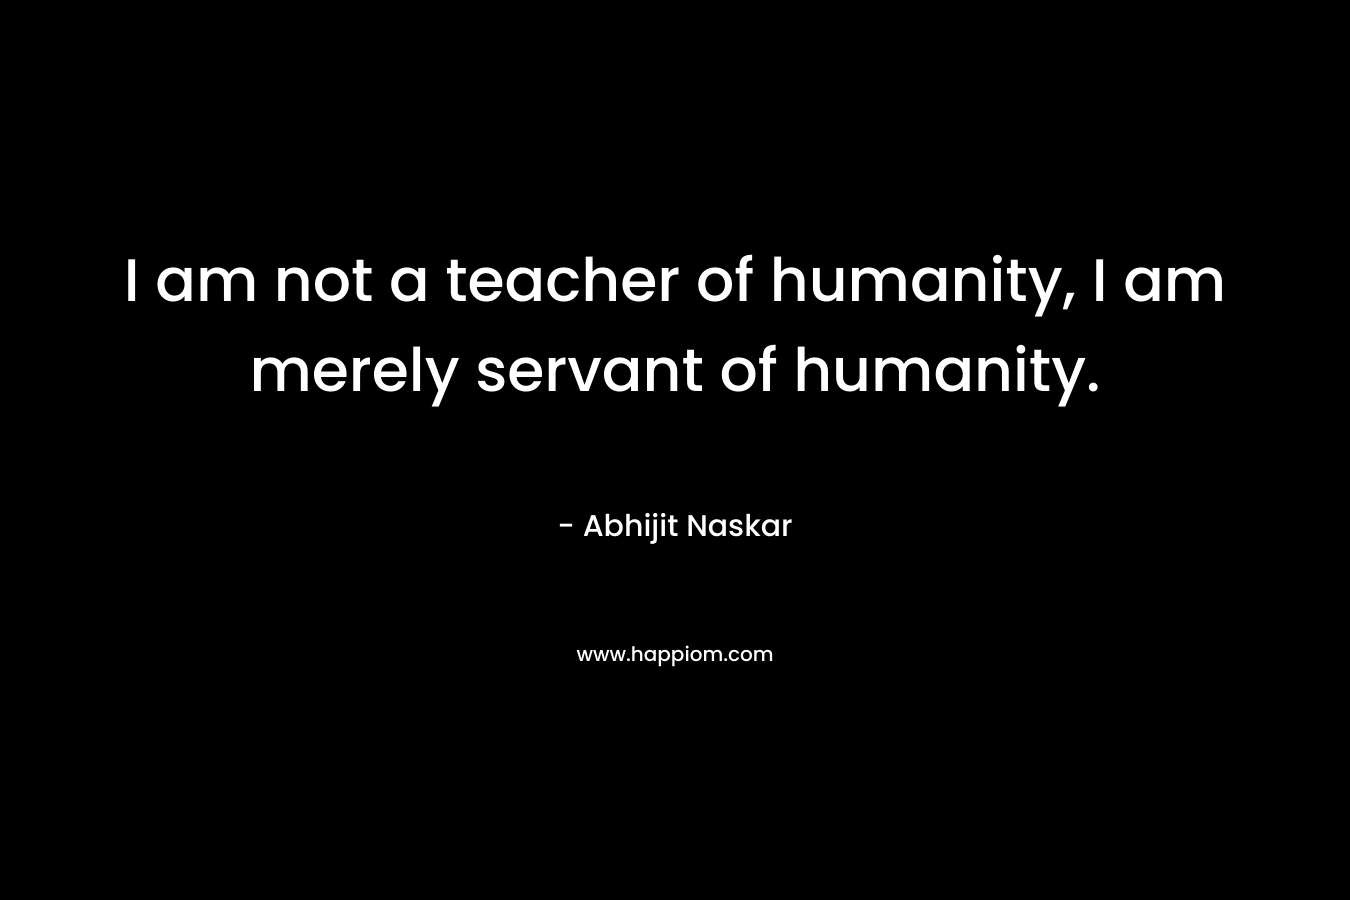 I am not a teacher of humanity, I am merely servant of humanity.